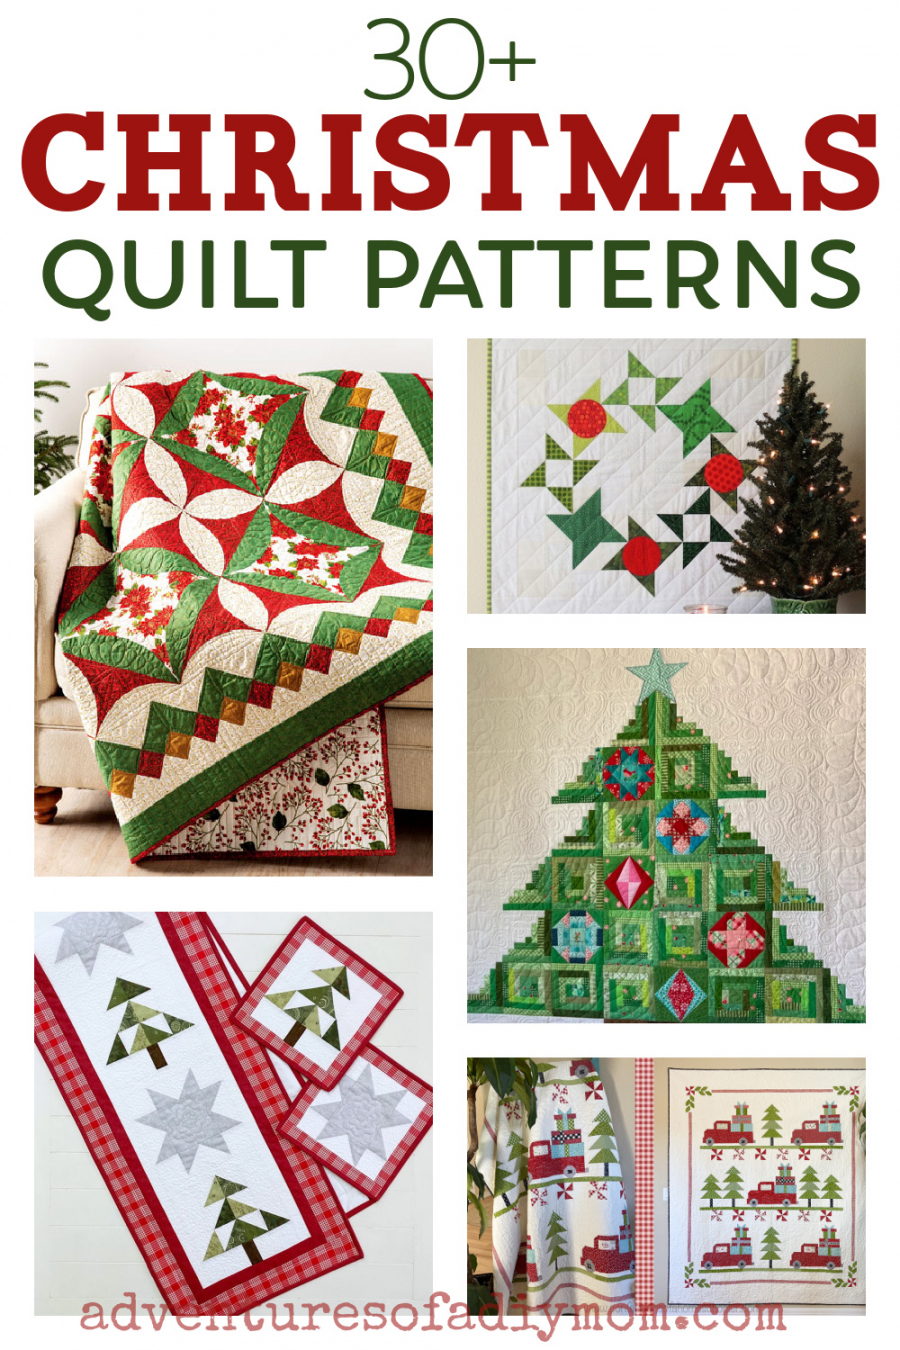 + Christmas Quilt Patterns to Make this Holiday Season  - FREE Printables - Free Printable Christmas Quilt Patterns Free